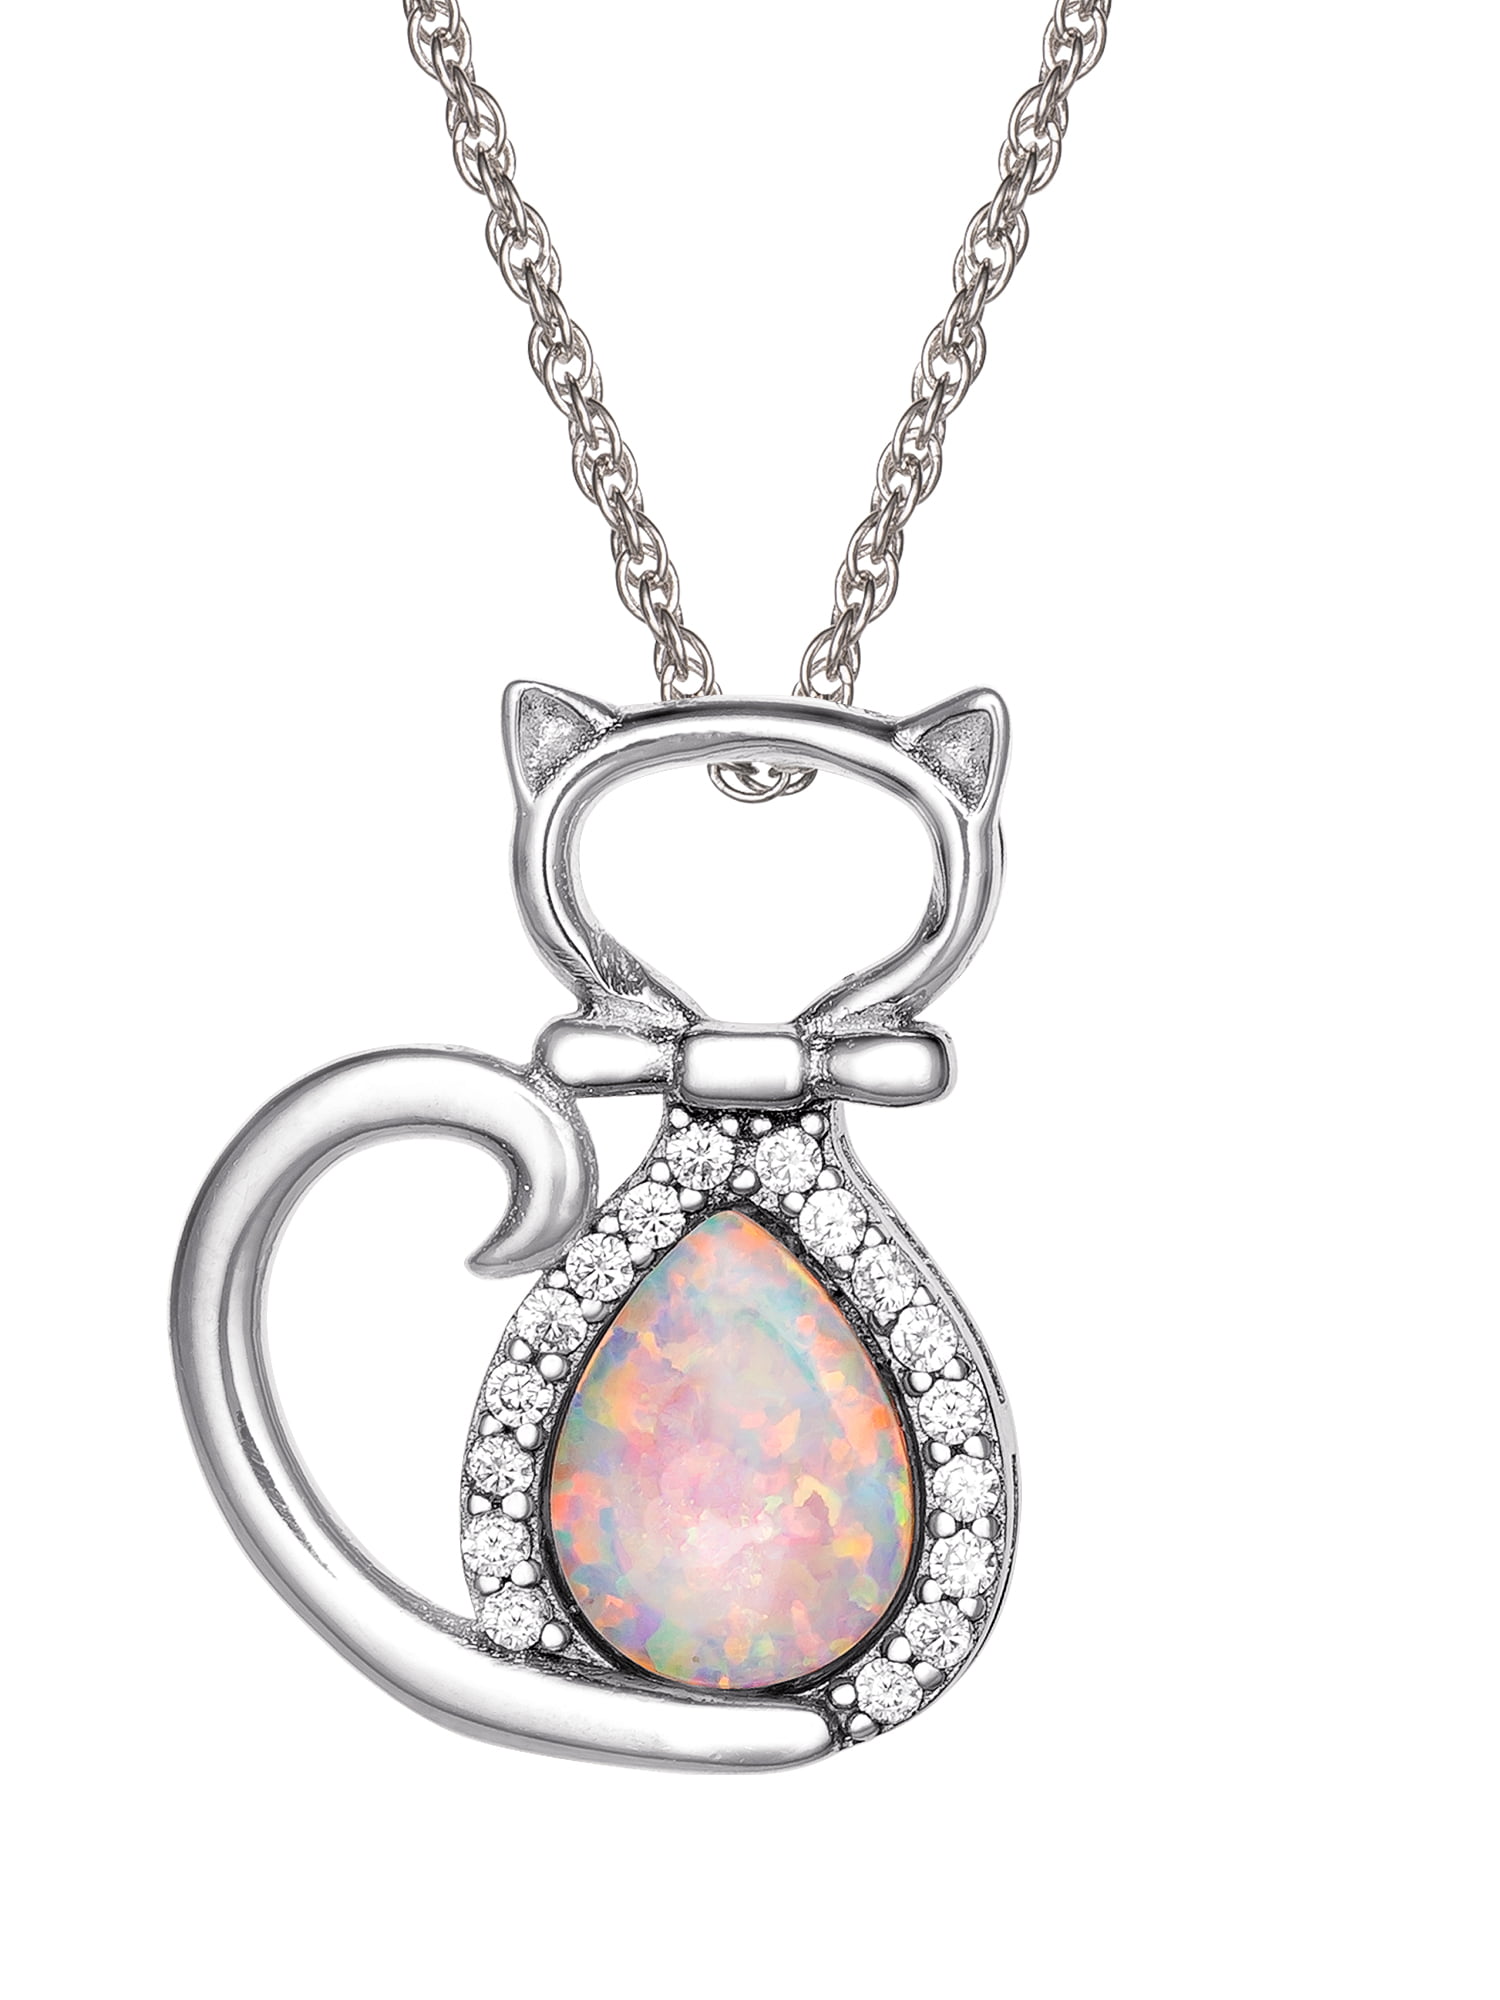 925 Sterling Silver Cat With Created Opal Accents Pendant